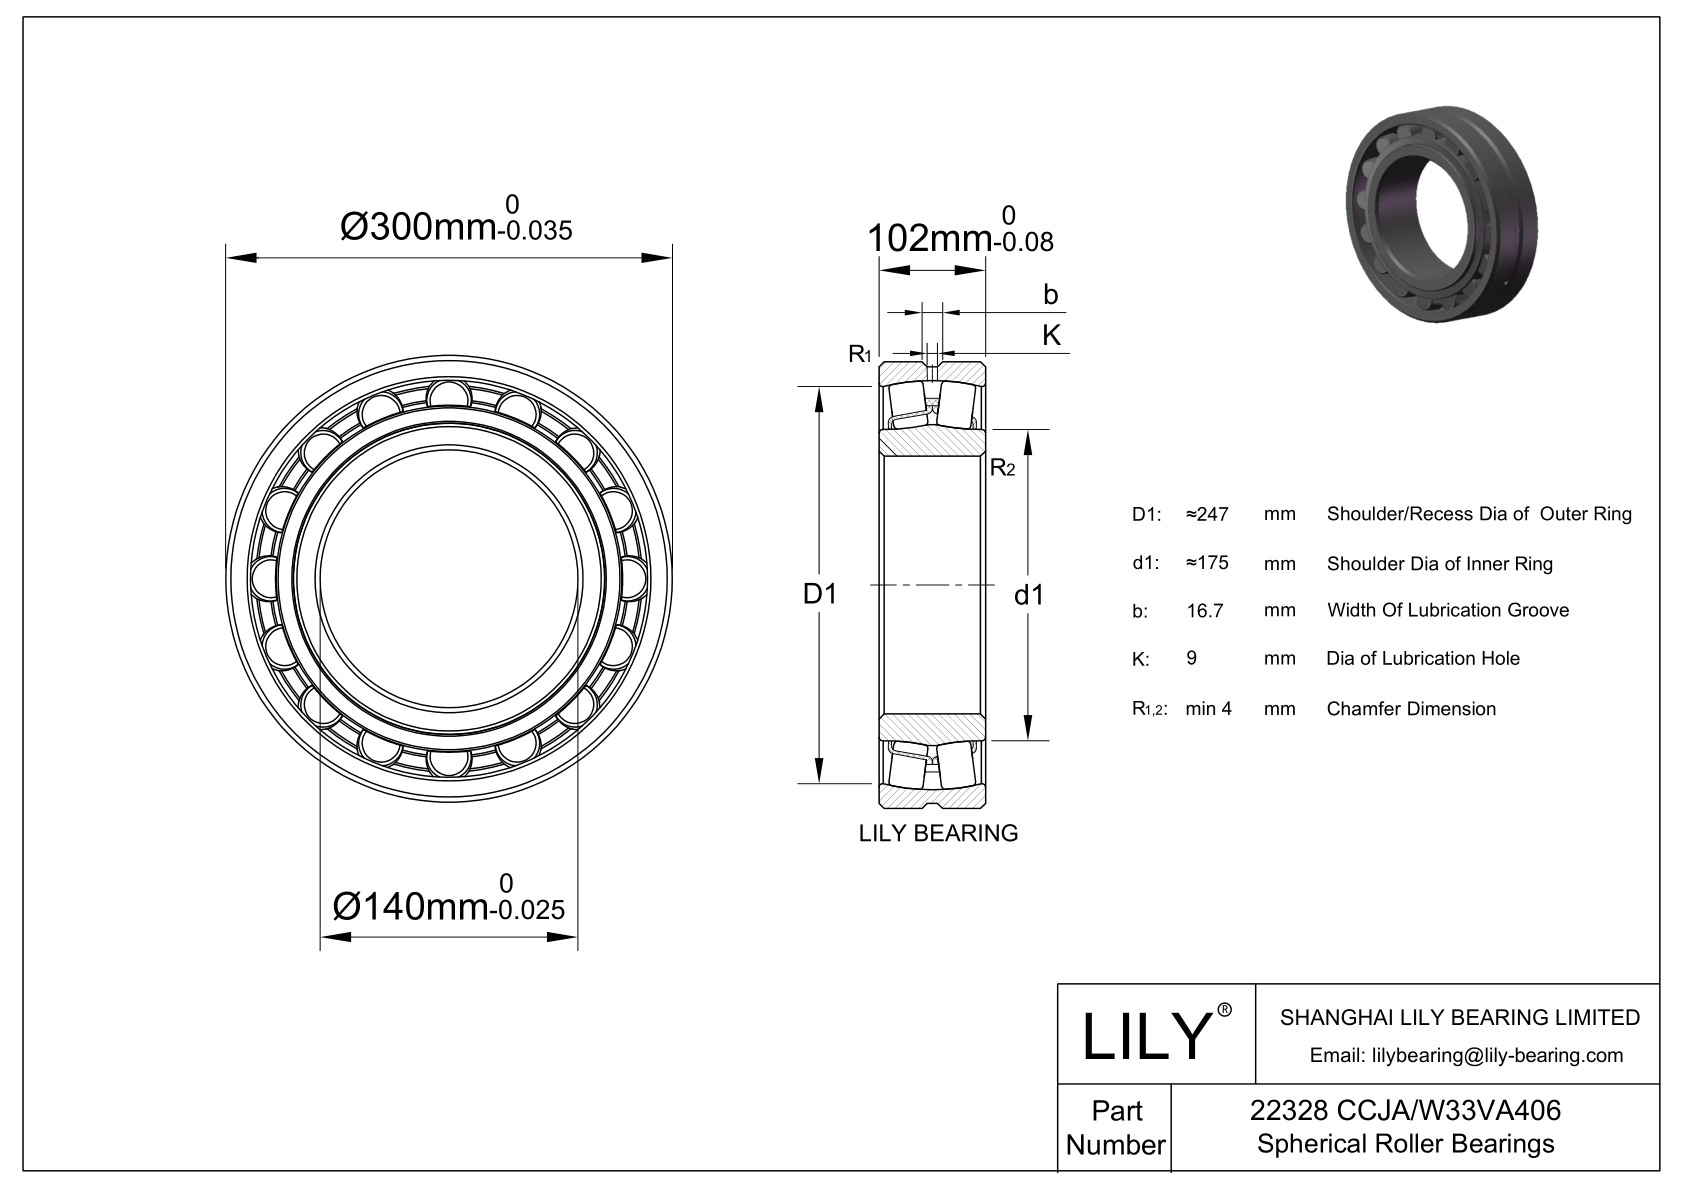 22328 CCJA/W33VA406 Double Row Spherical Roller Bearing cad drawing